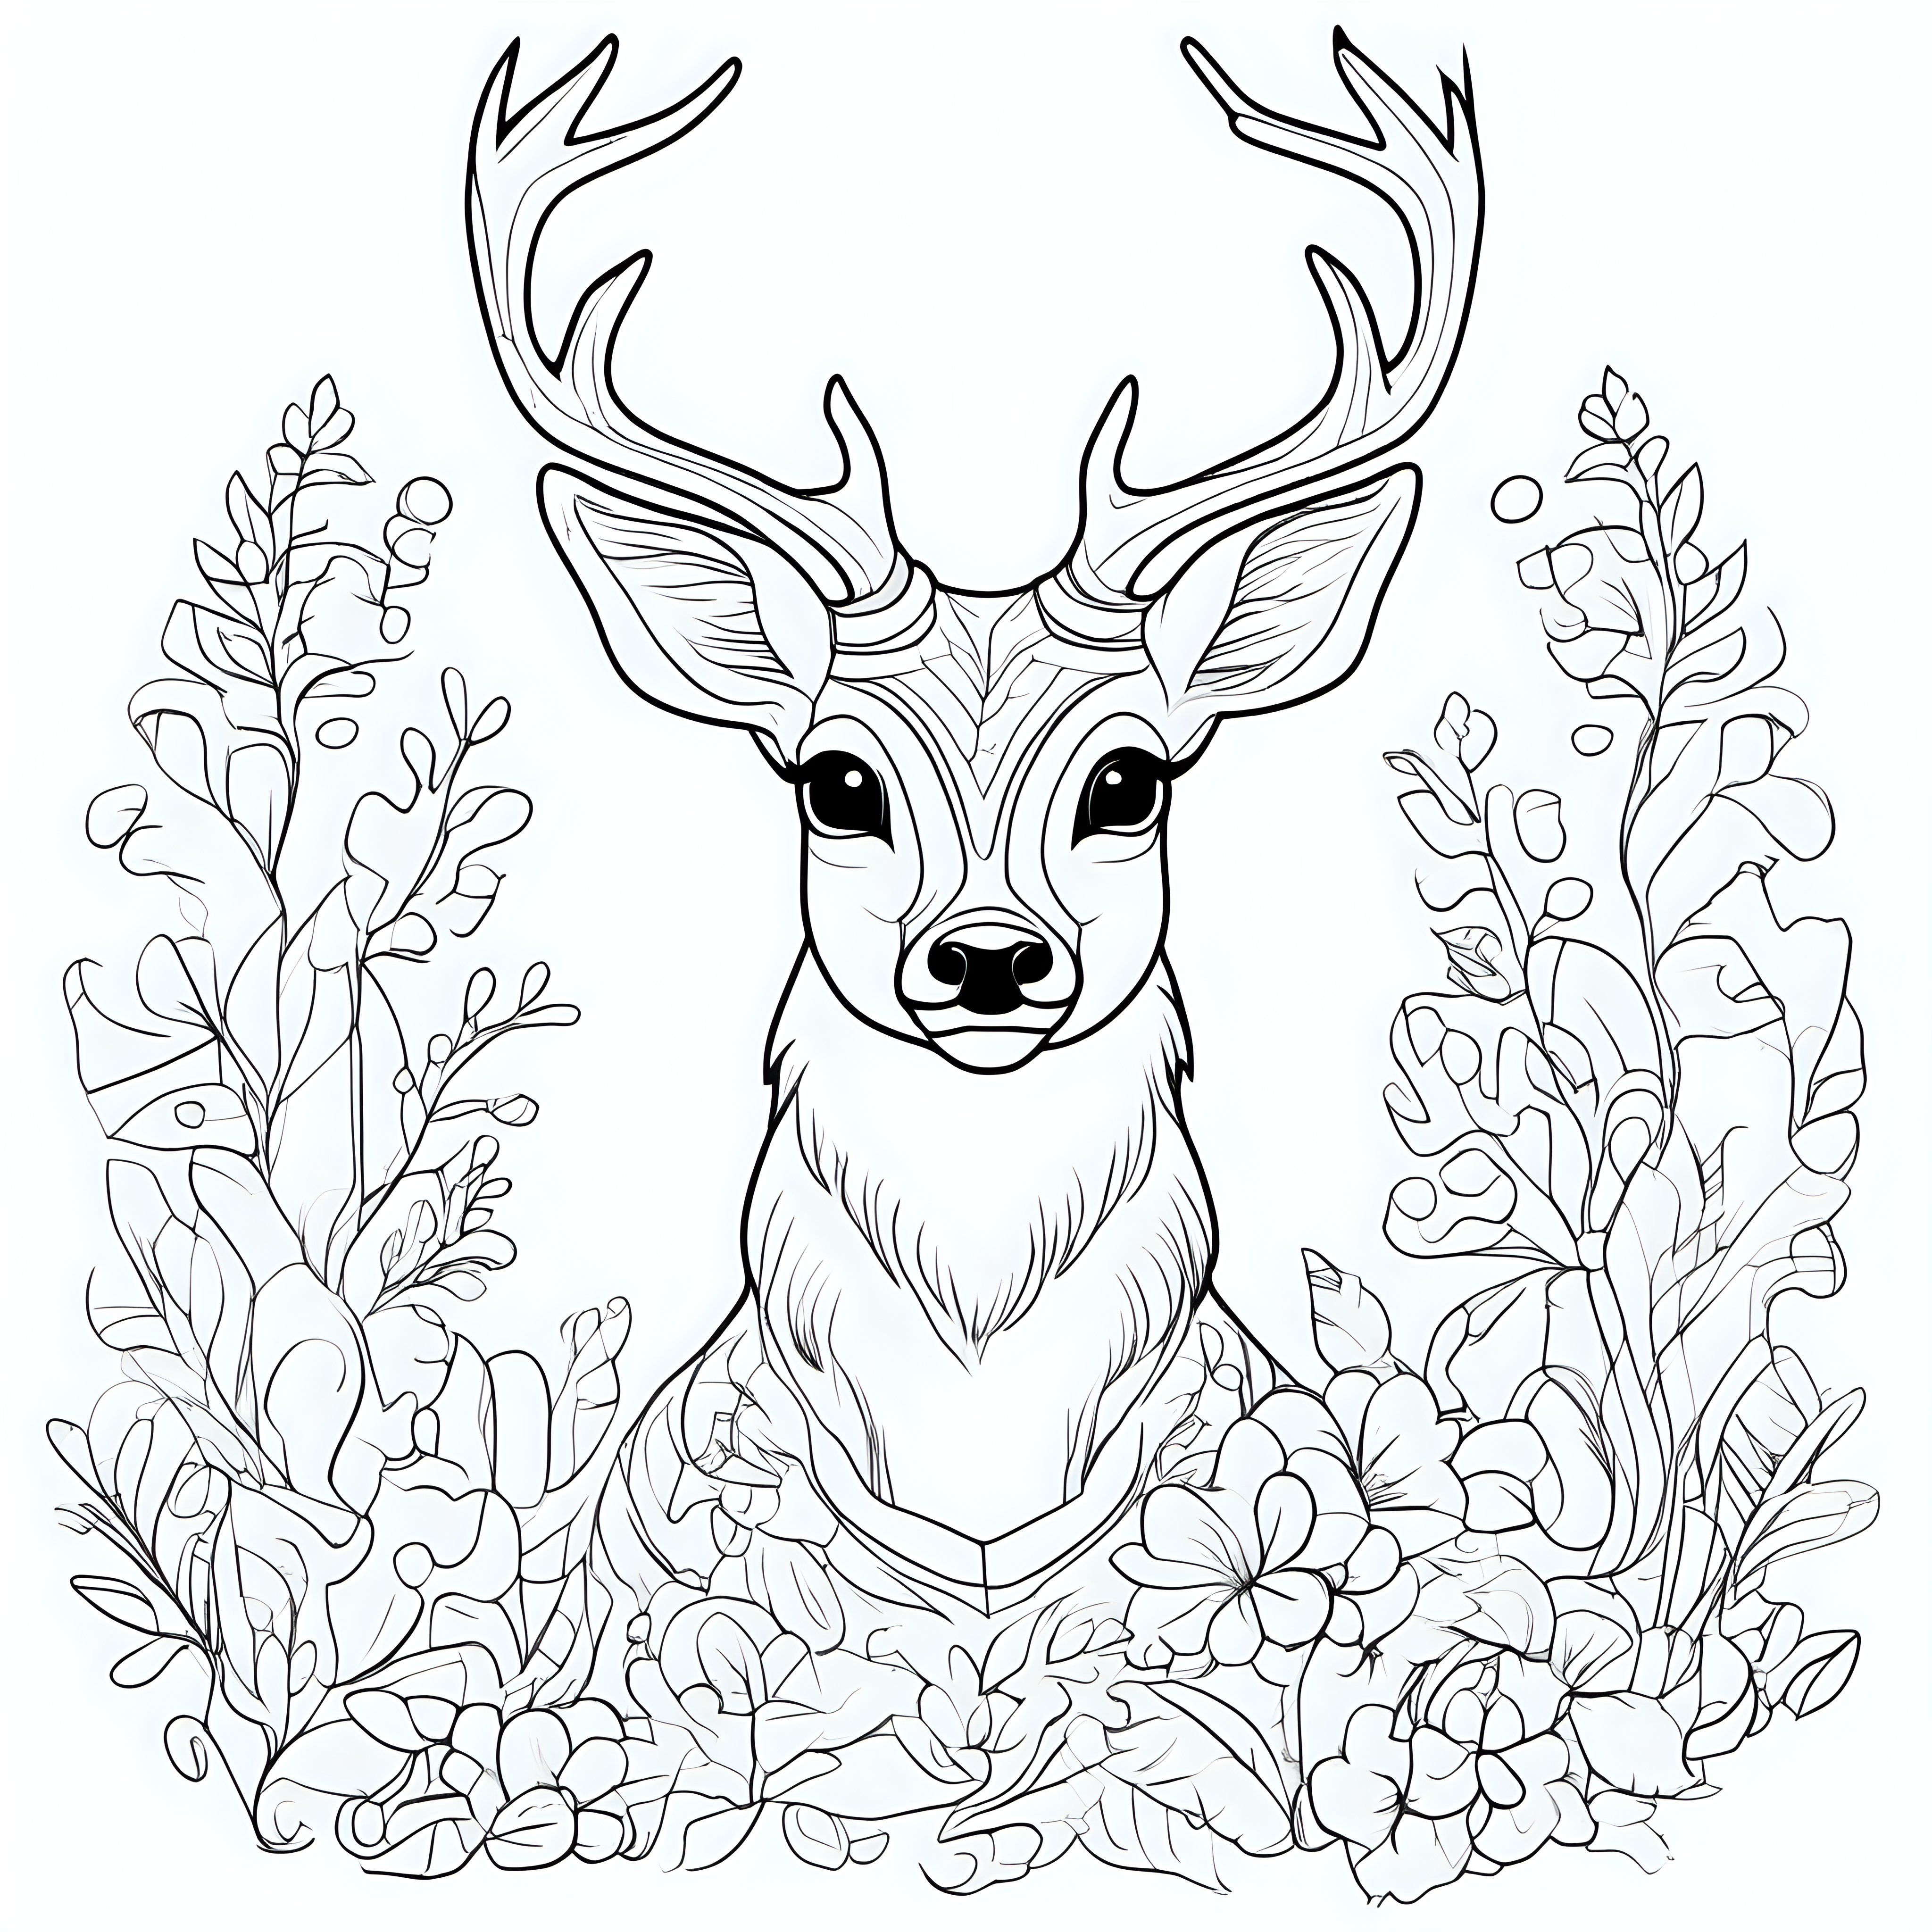 draw a cute deer with only the outline